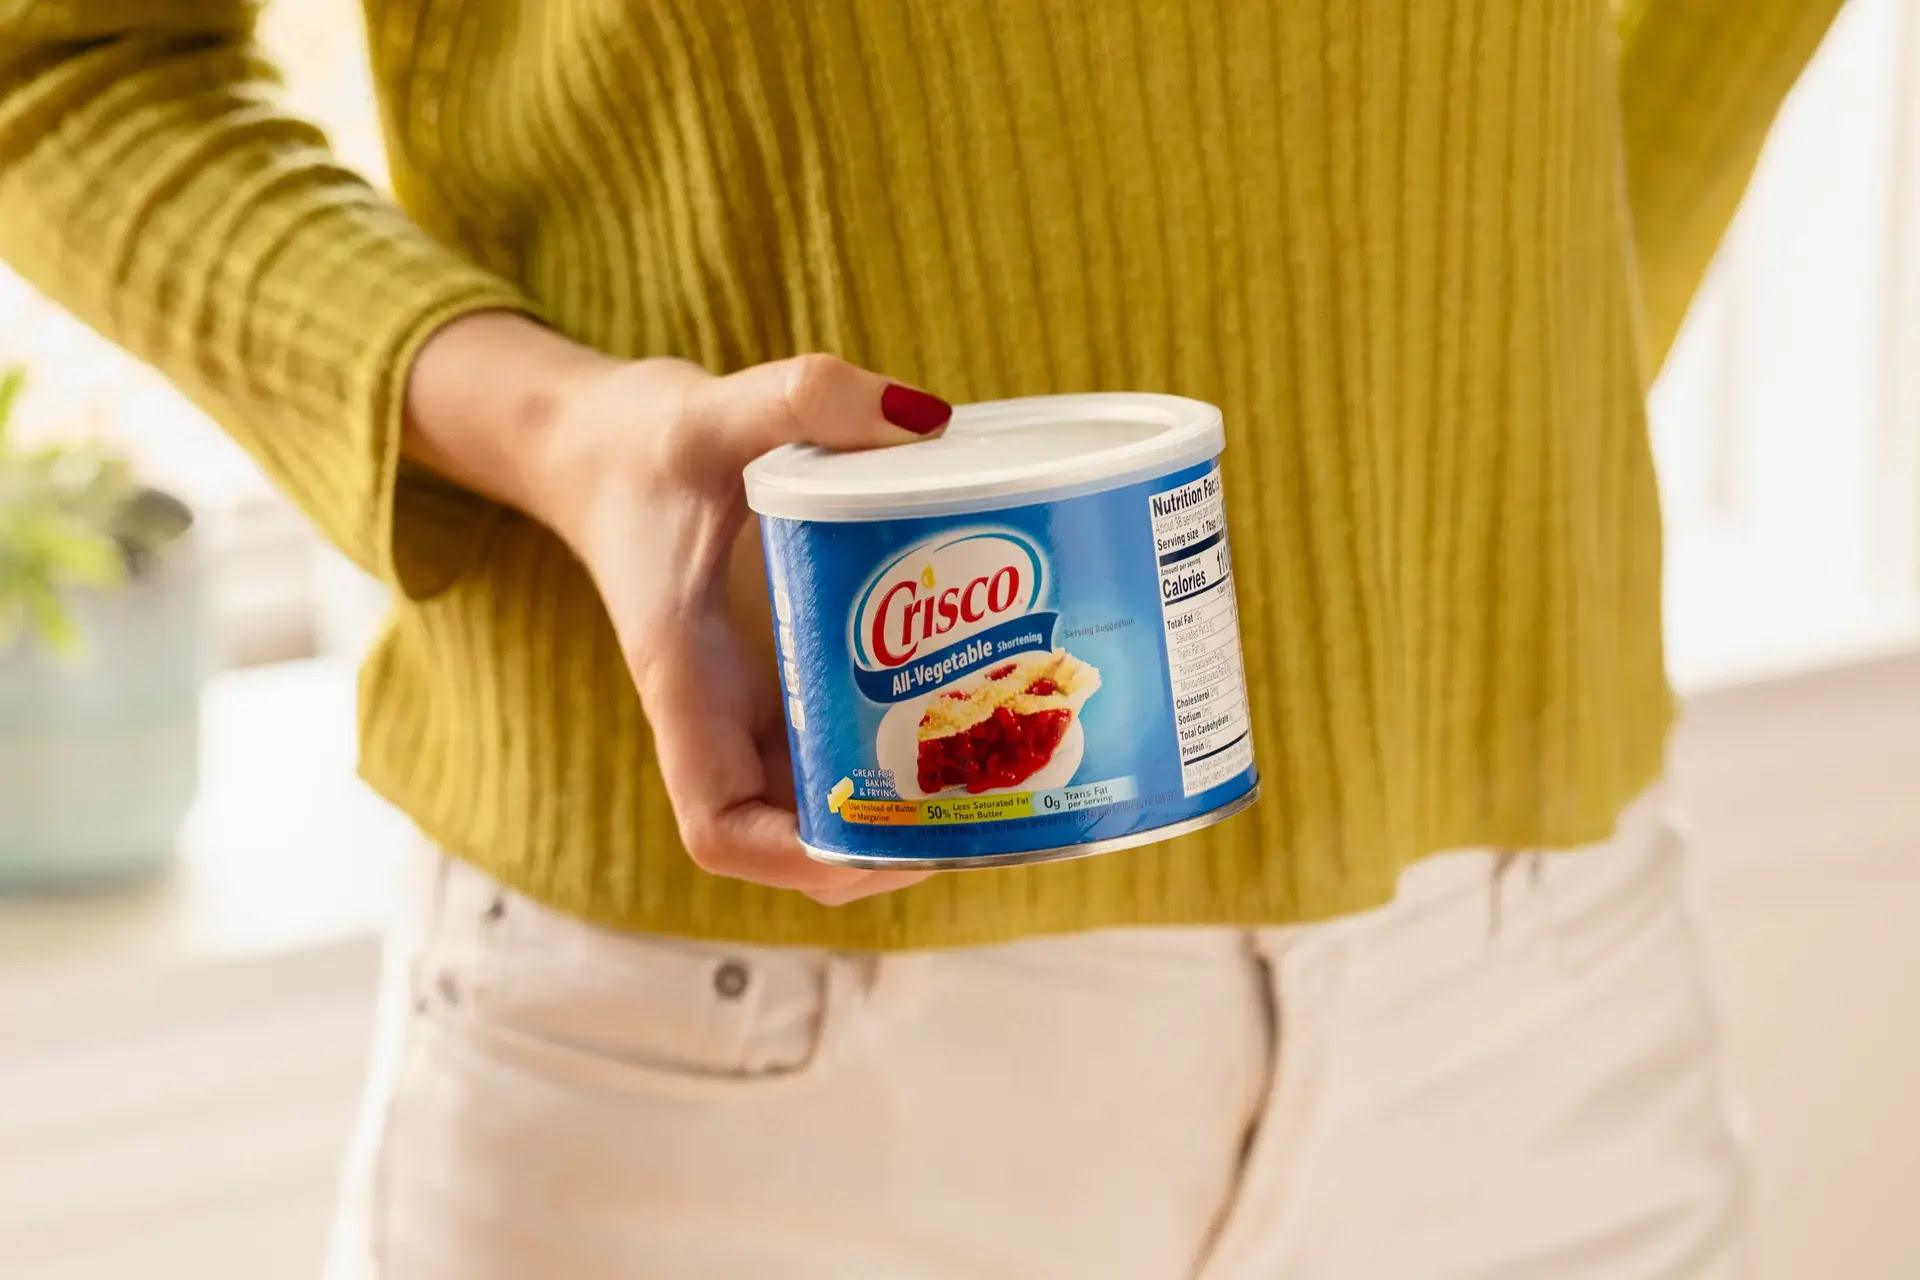 How To Store Crisco